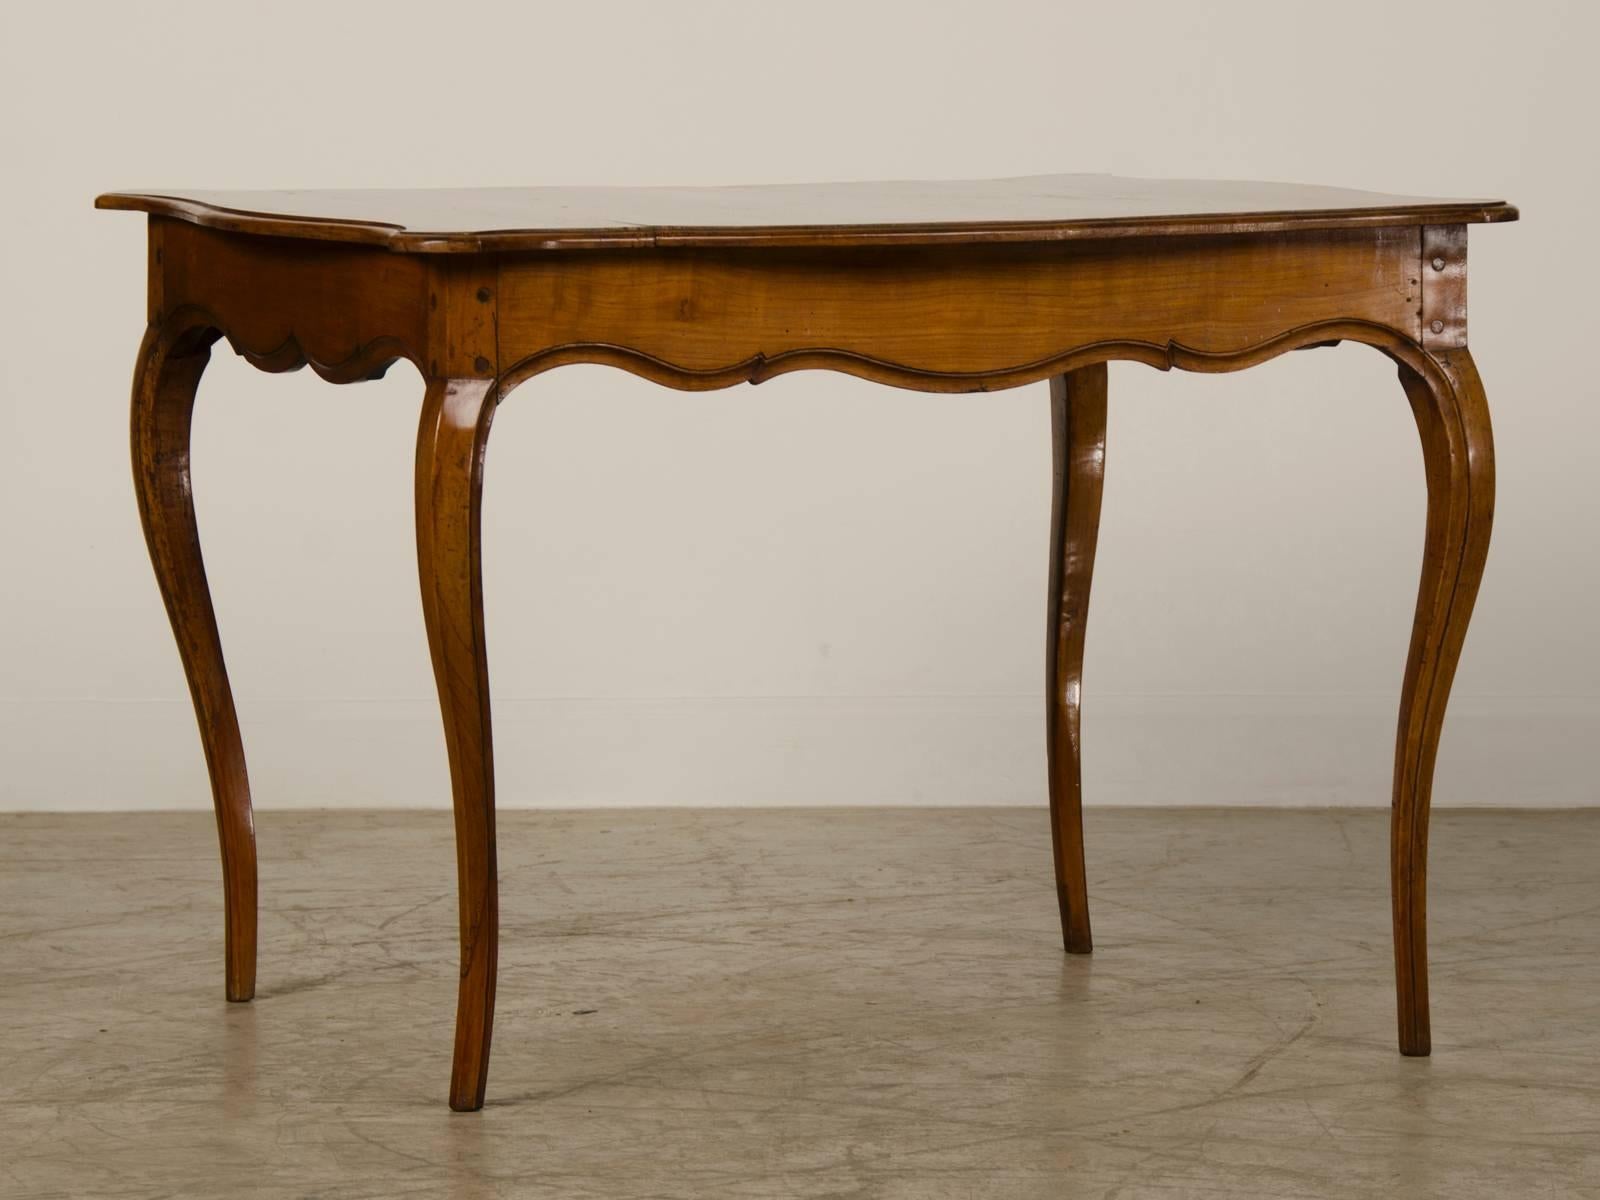 Antique French Louis XV Period Cherrywood Table, circa 1760 For Sale 2